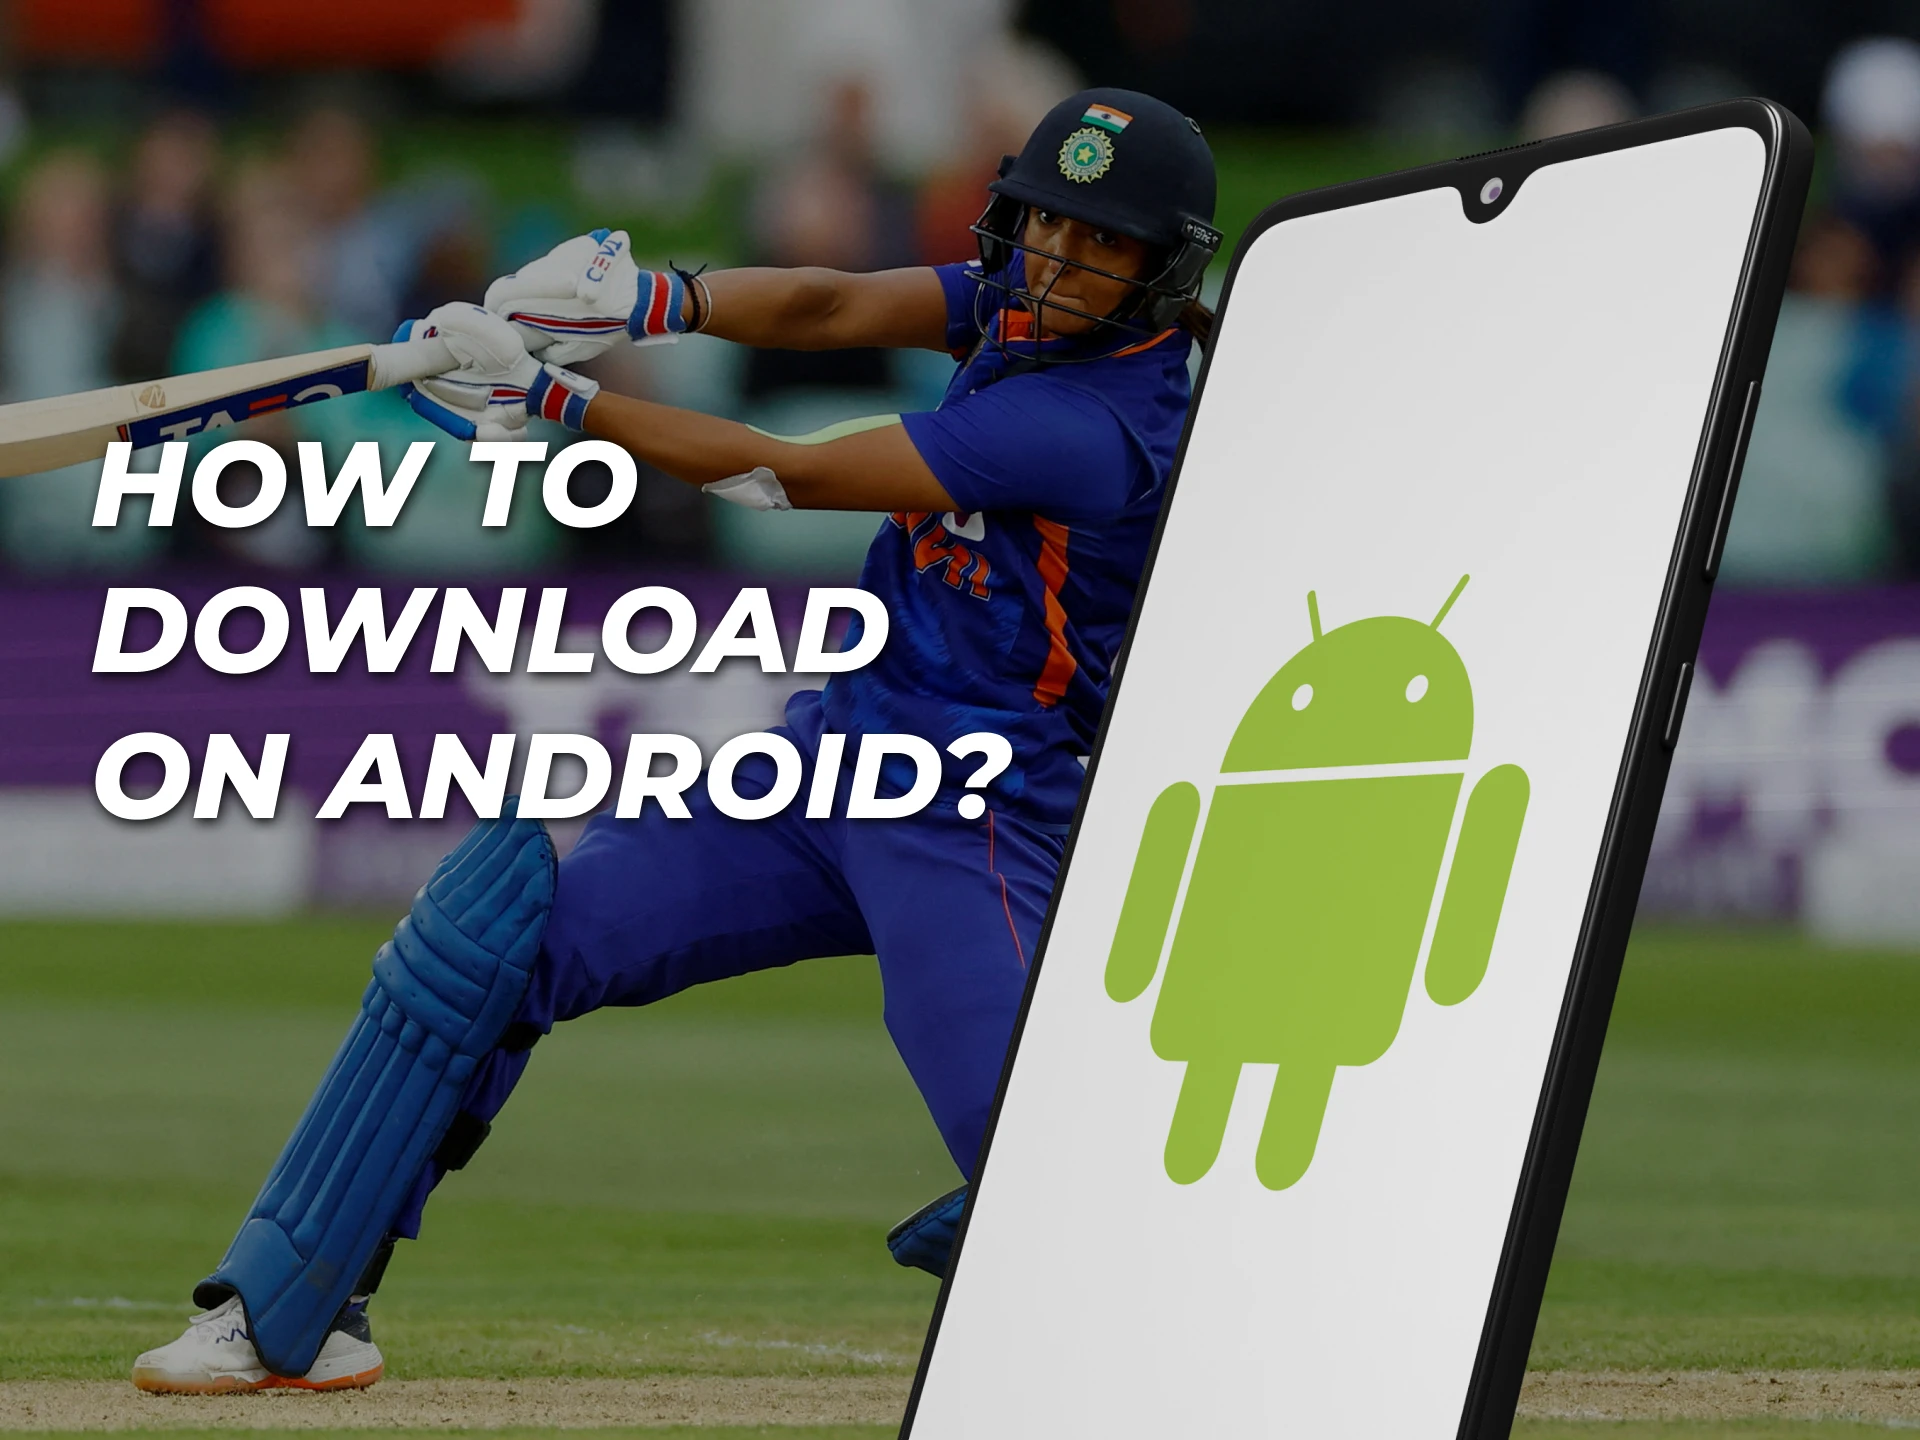 Read this guide to learn how to download a betting app on your Android device.